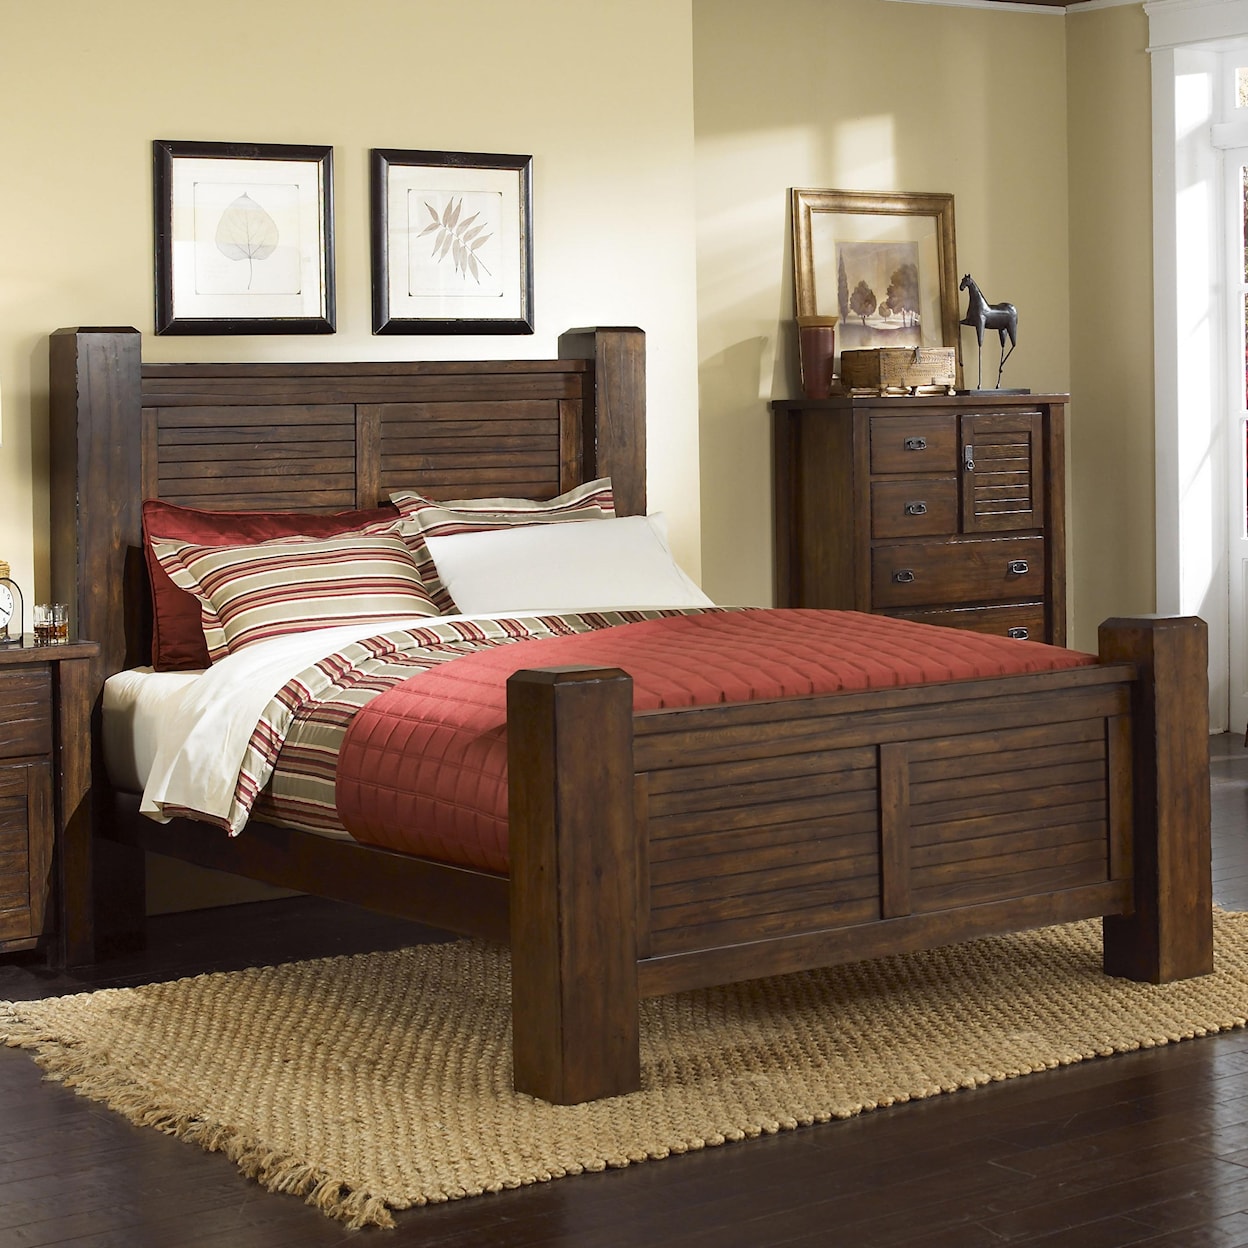 Carolina Chairs Trestlewood Queen Post Bed